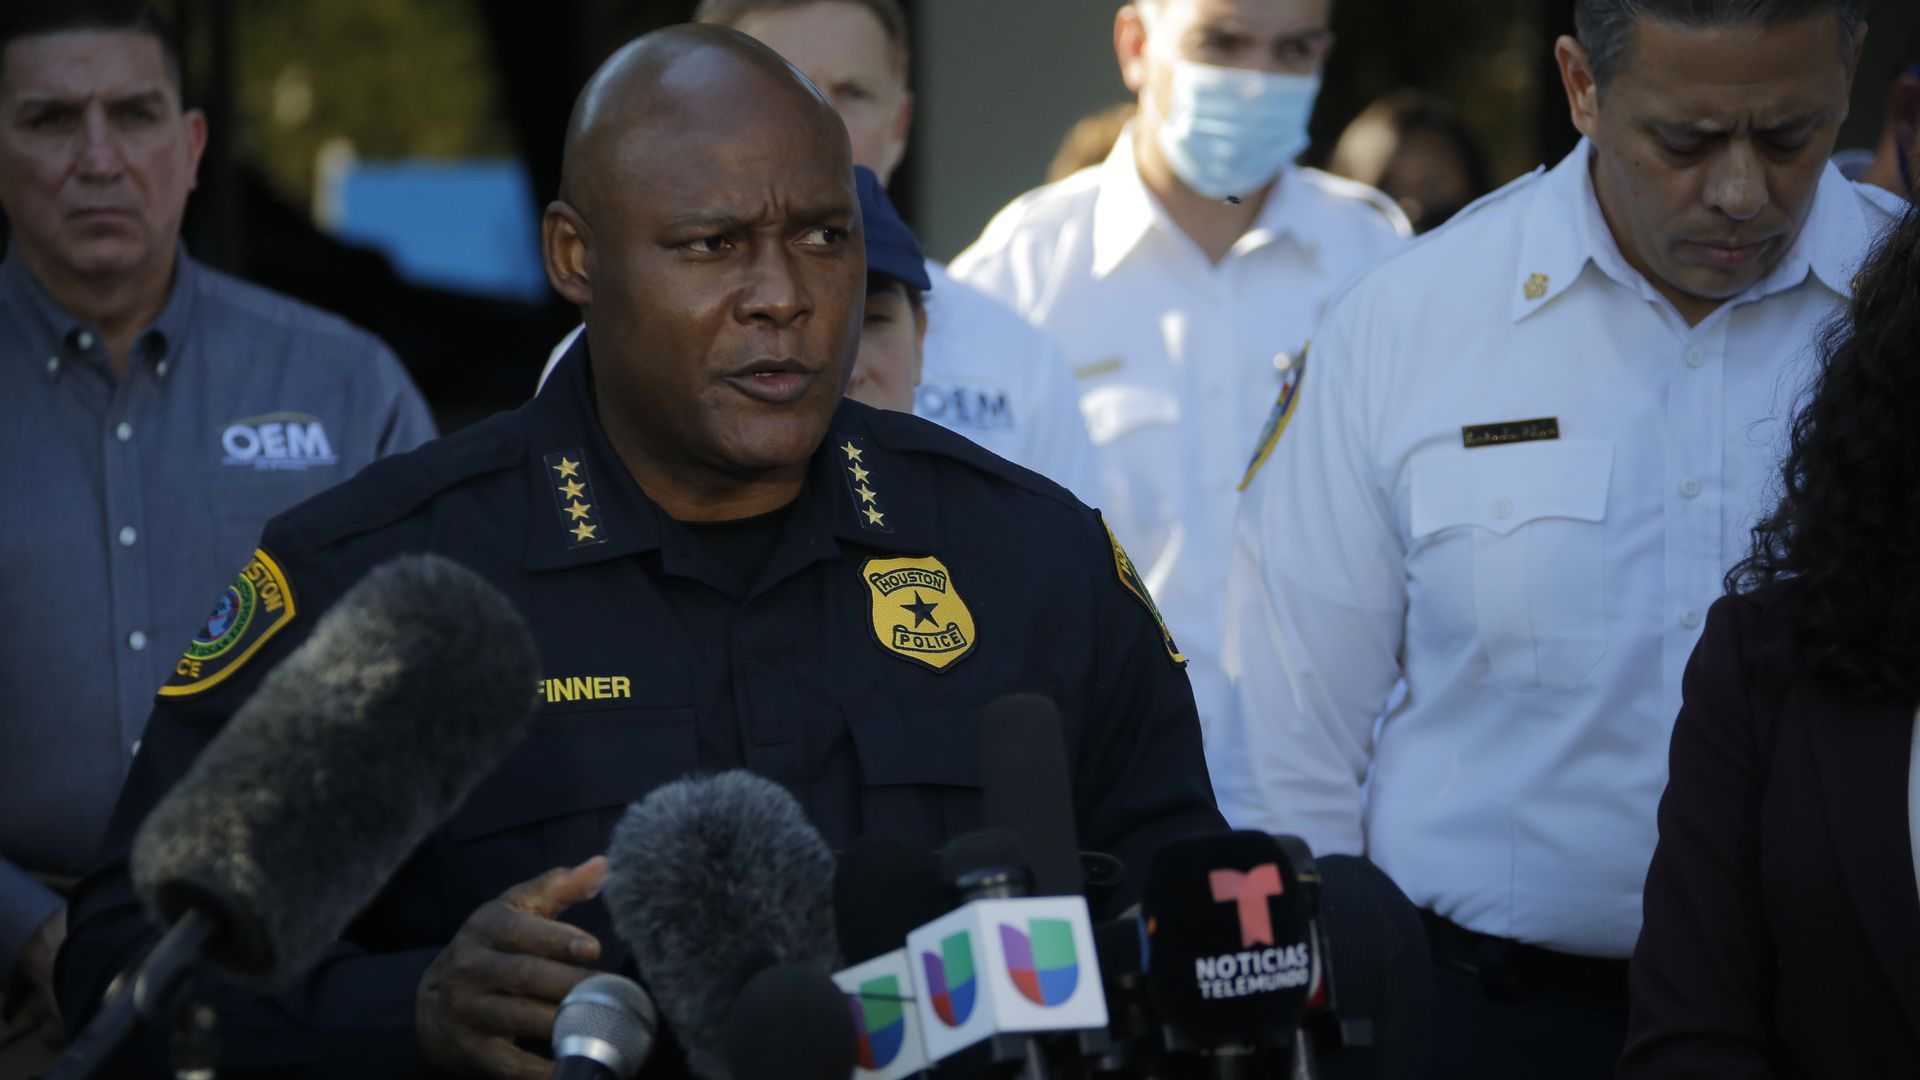 Houston Police Chief Troy Finner speaks to the media following the shooting deaths of three men.